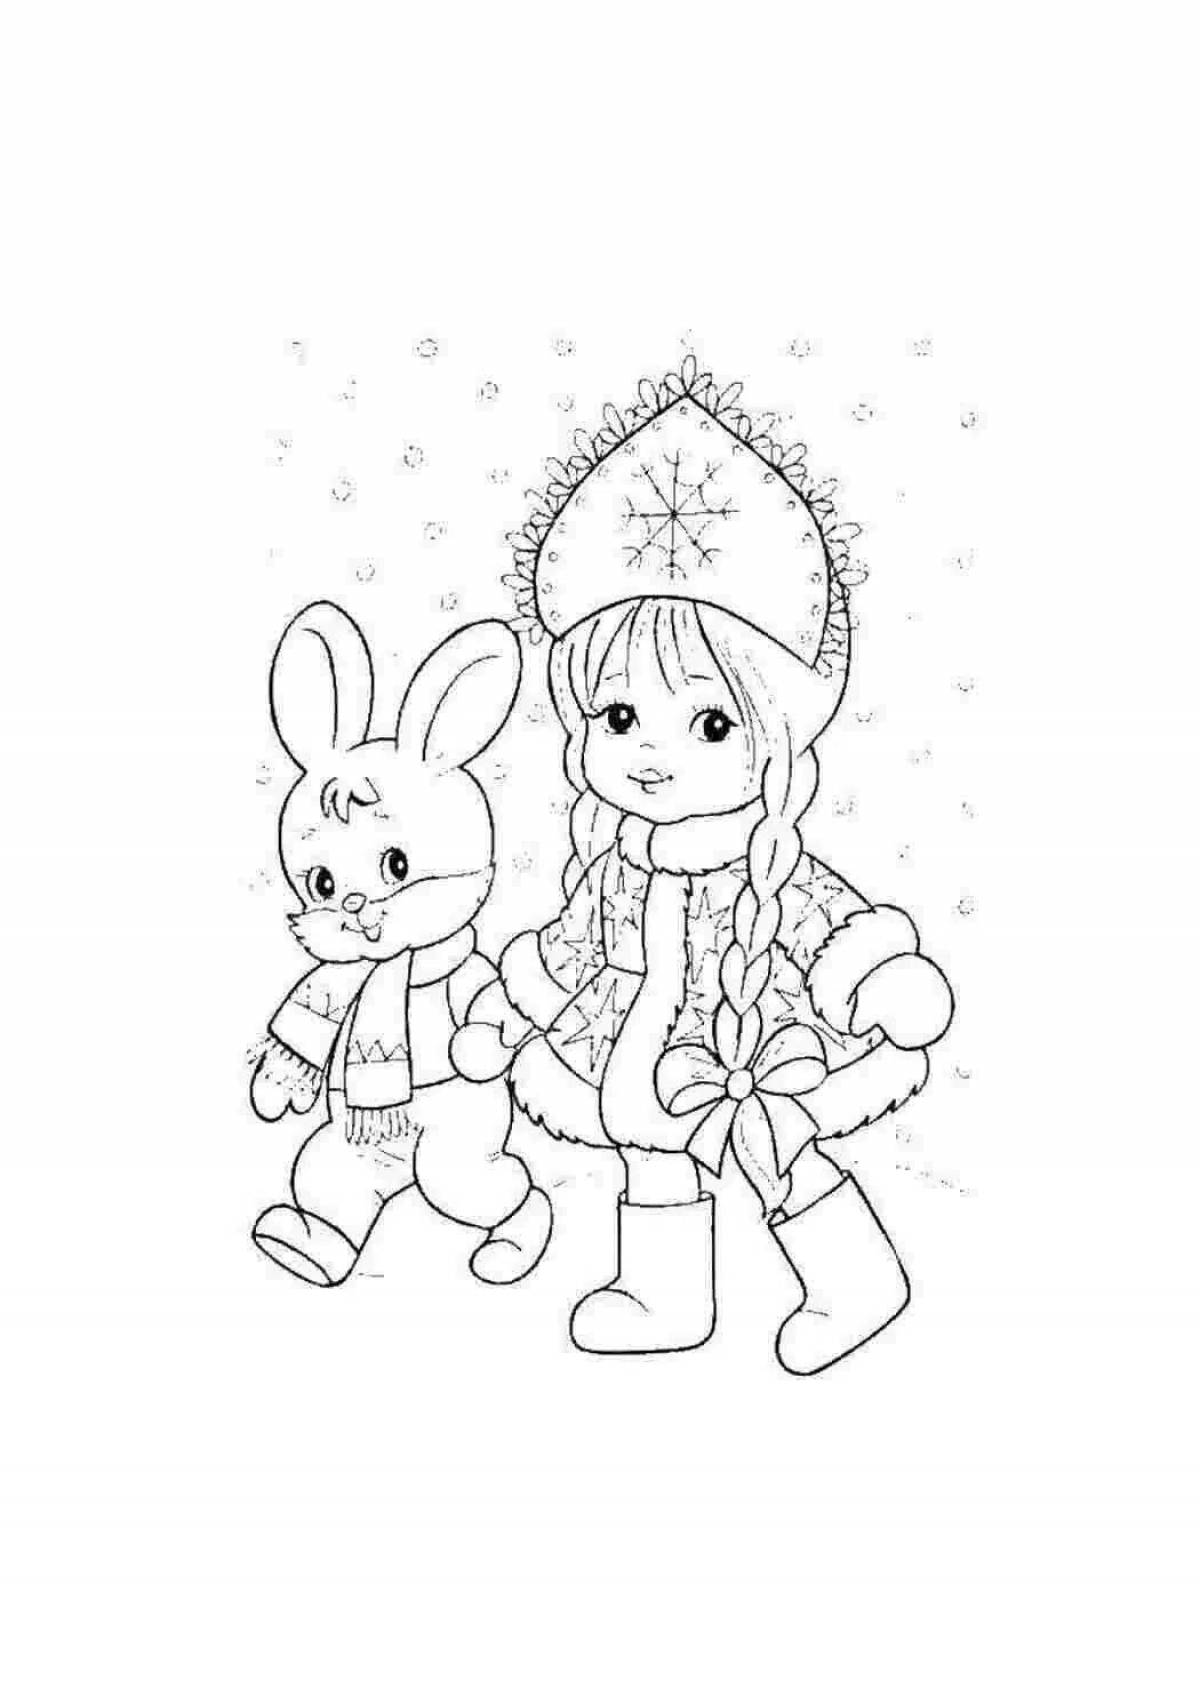 Delightful coloring frost and hare